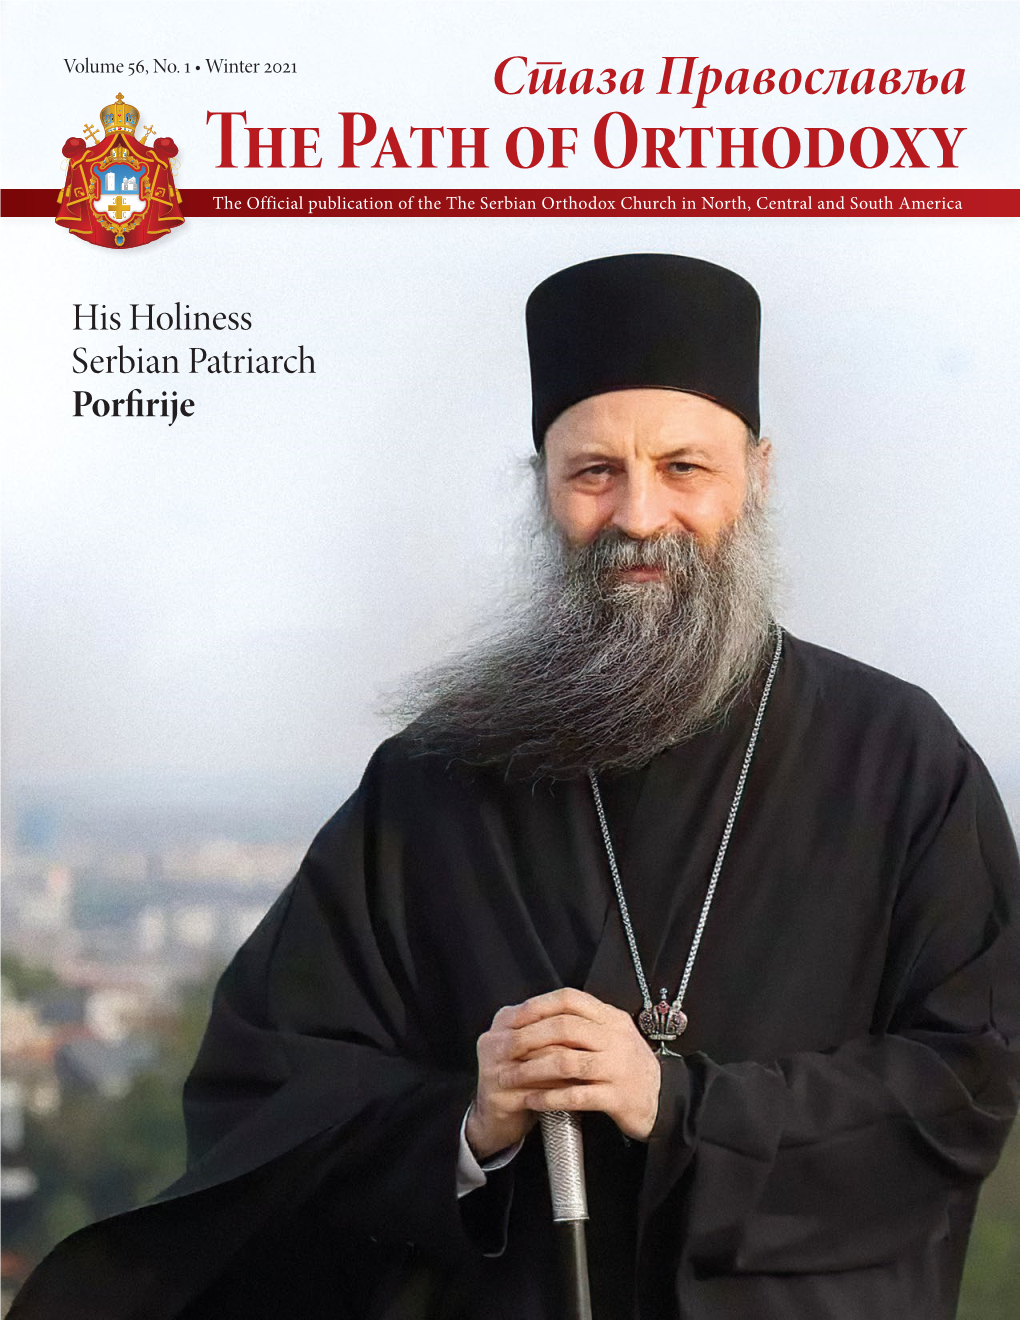 The Path of Orthodoxy the Official Publication of the the Serbian Orthodox Church in North, Central and South America